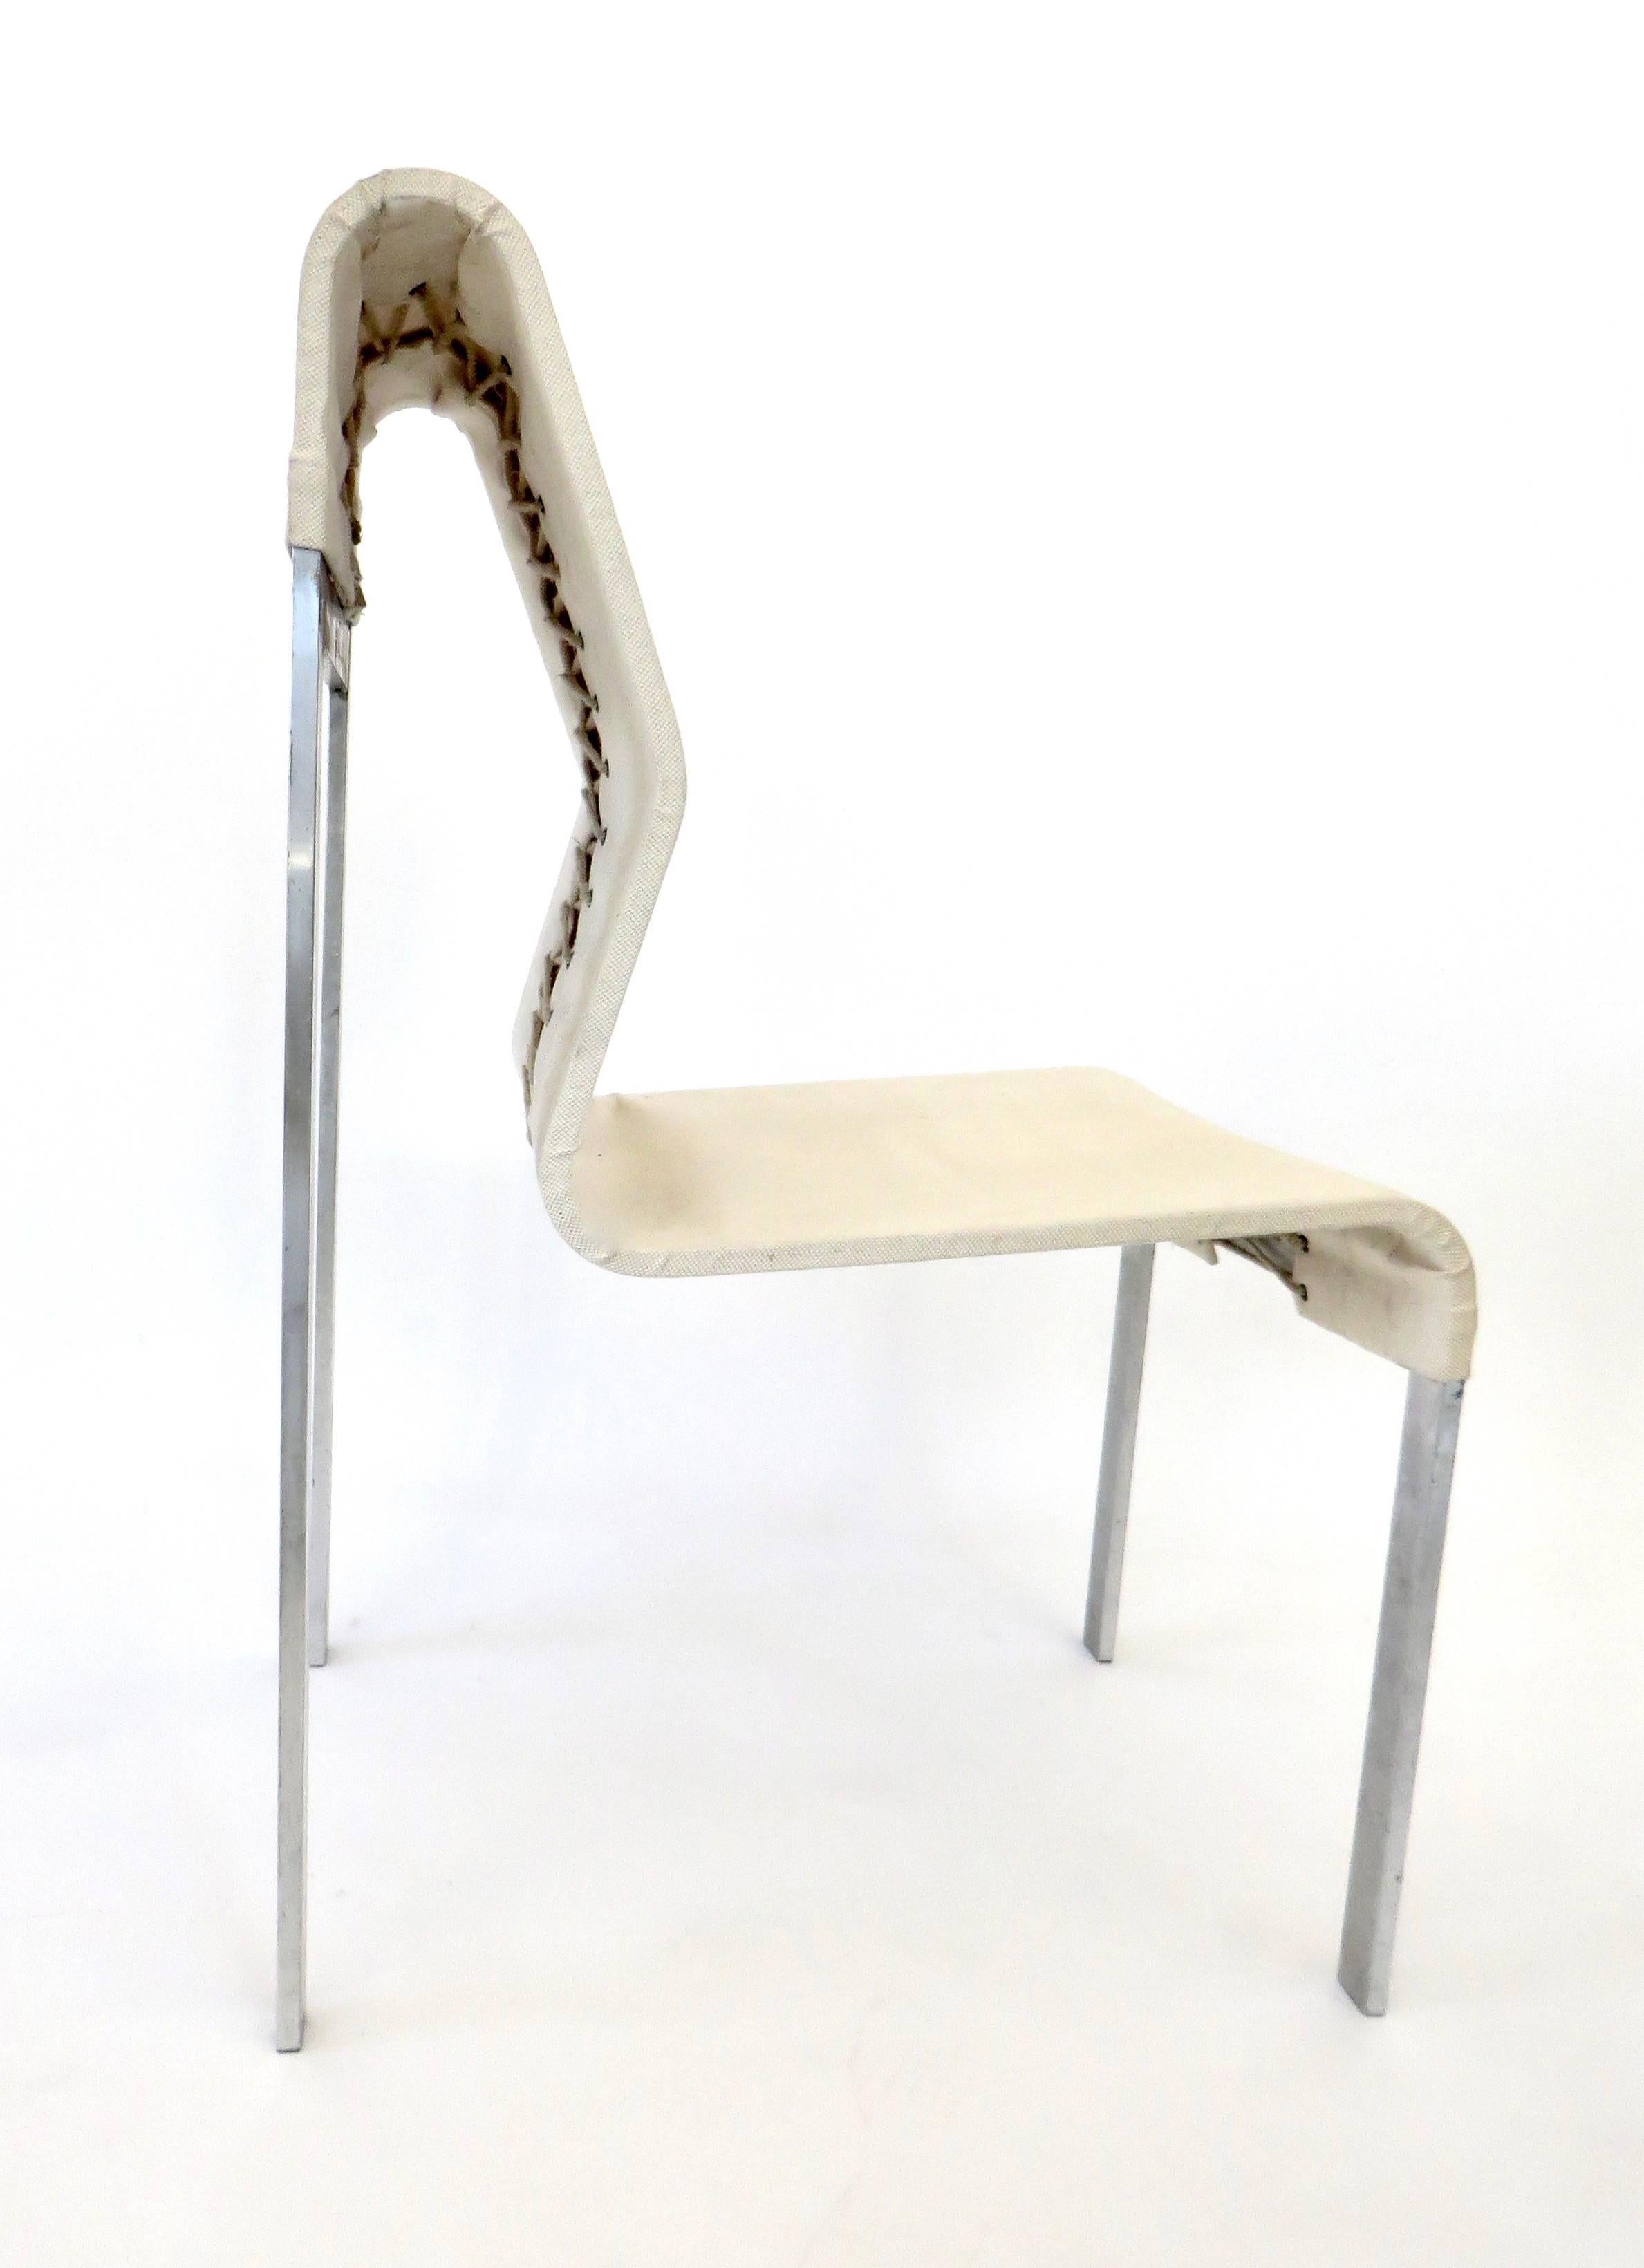 An Italian abstract strap steel and linen fabric side and statement chair.
The steel has been bent into an abstract sculptural shape with curves and folds. 
The fabric is a heavy linen tied in the back as a laced corset. 
Perfect for a fashion